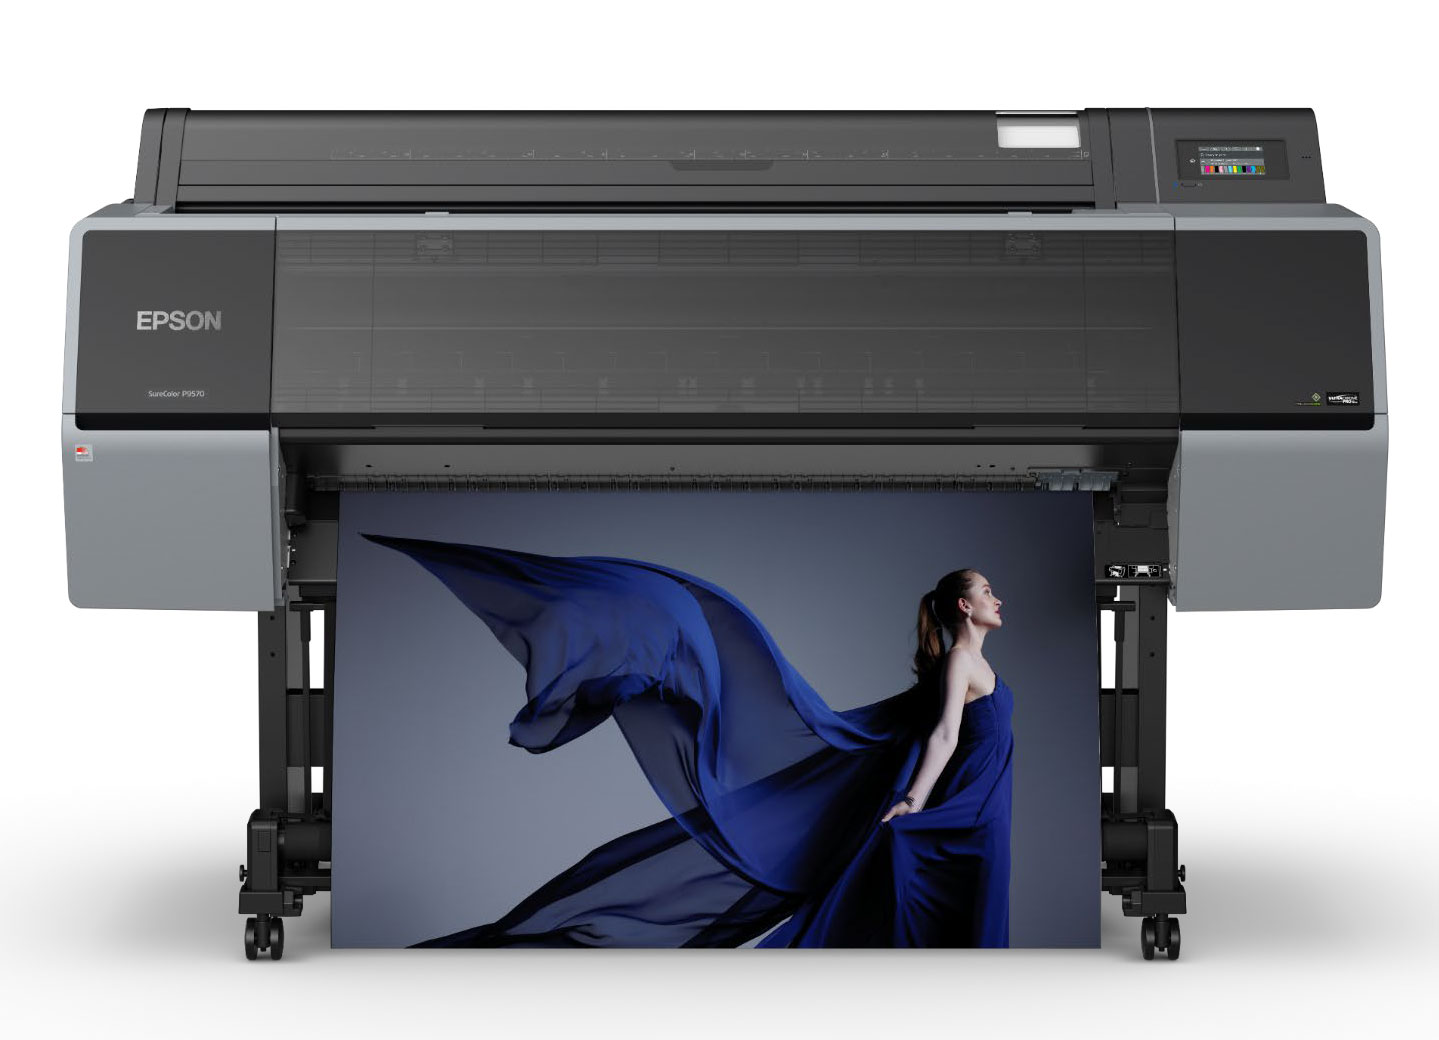 Introducing the Epson P9500